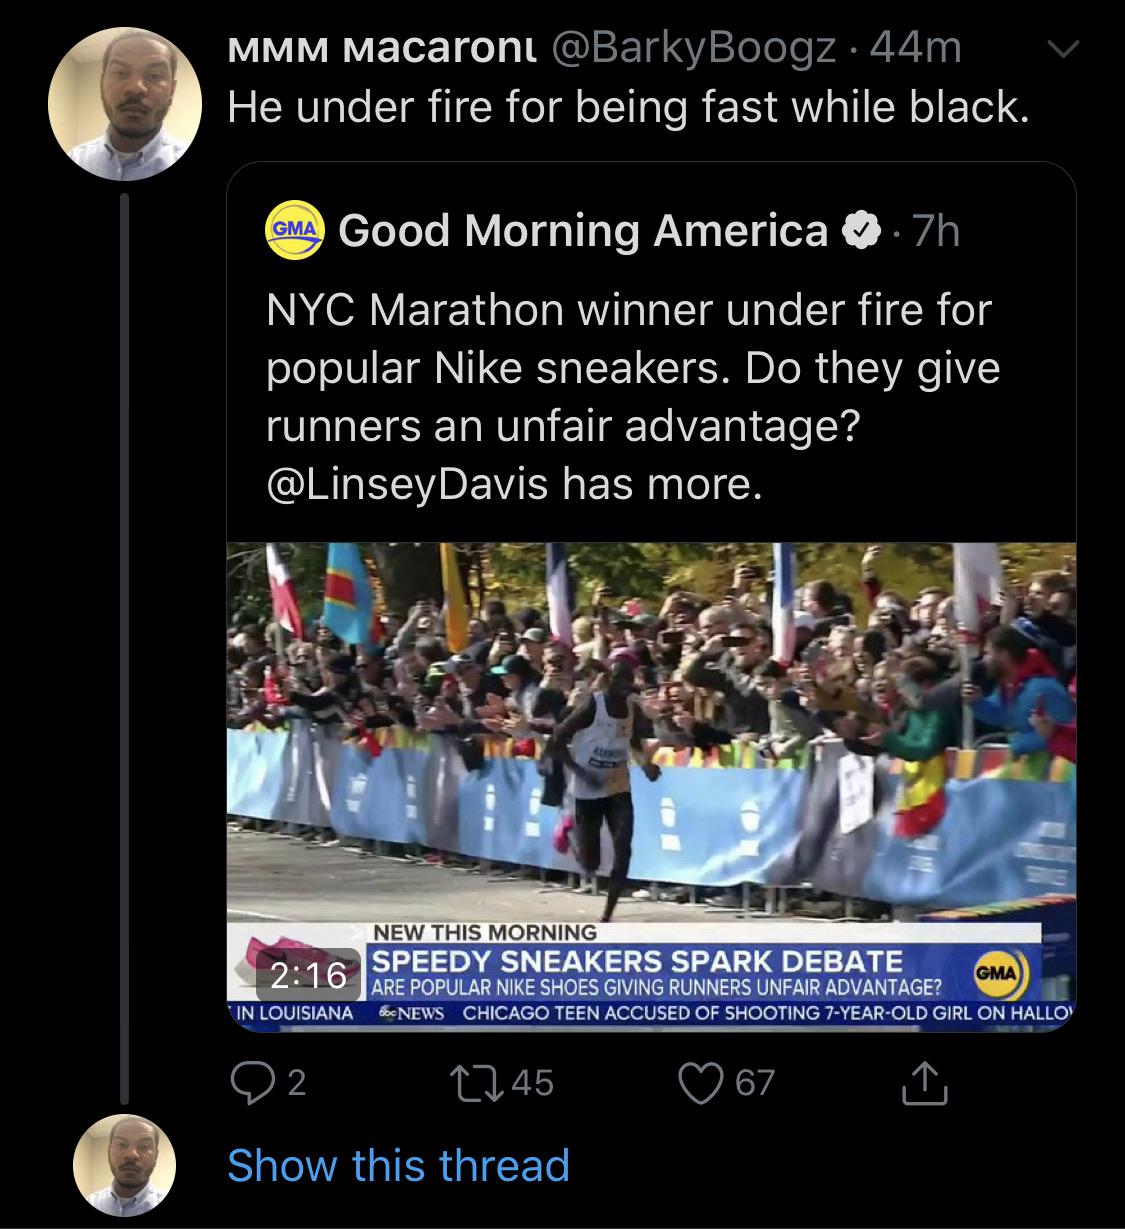 screenshot - v Mmm Macaroni . 44m He under fire for being fast while black. Cma Good Morning America. 7h Nyc Marathon winner under fire for popular Nike sneakers. Do they give runners an unfair advantage? has more. New This Morning Speedy Sneakers Spark D